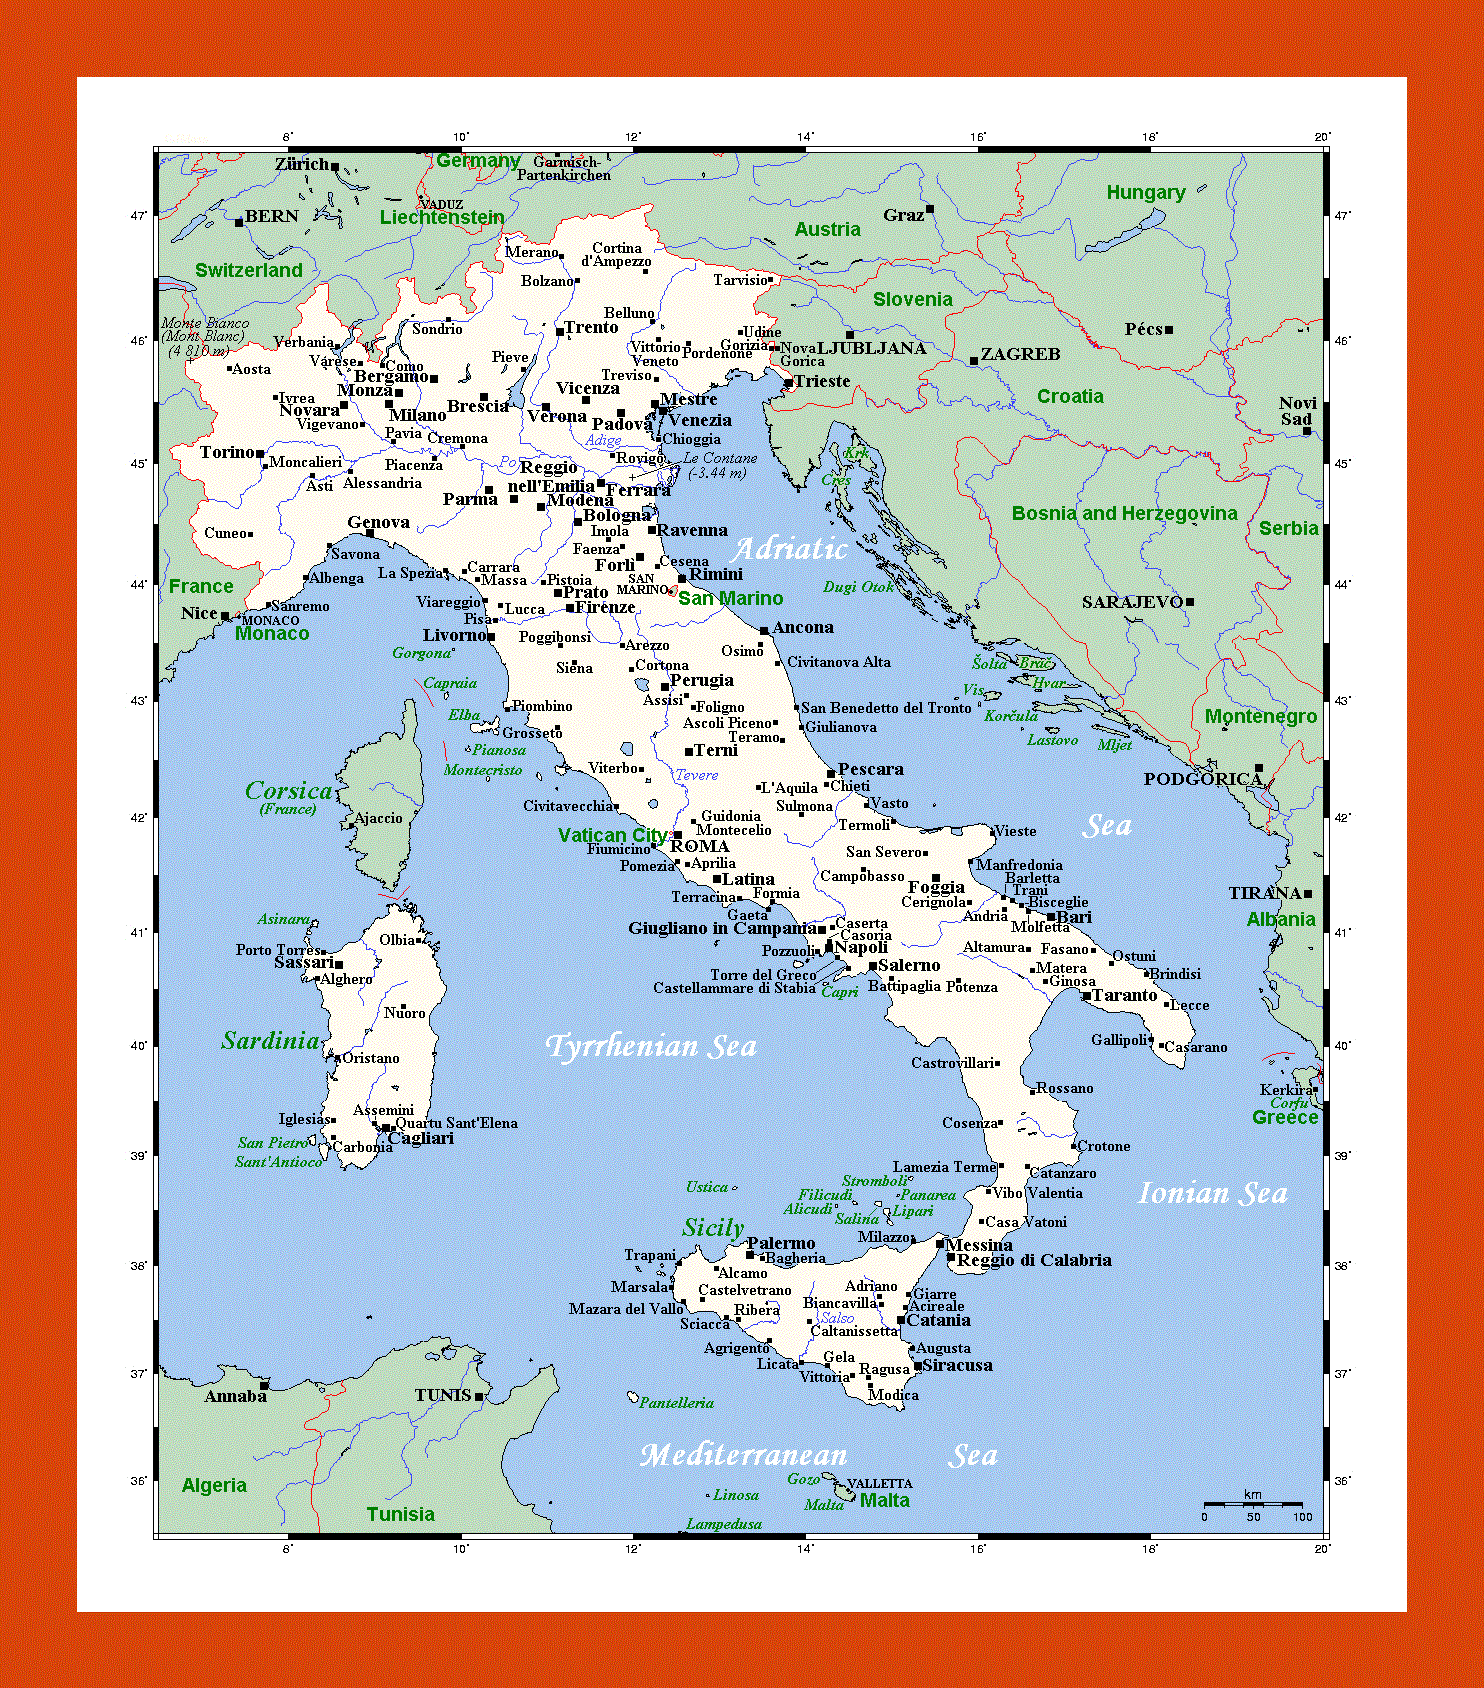 Map Of Italy Maps Of Italy Maps Of Europe Gif Map Maps Of The World In Gif Format Maps Of The Whole World